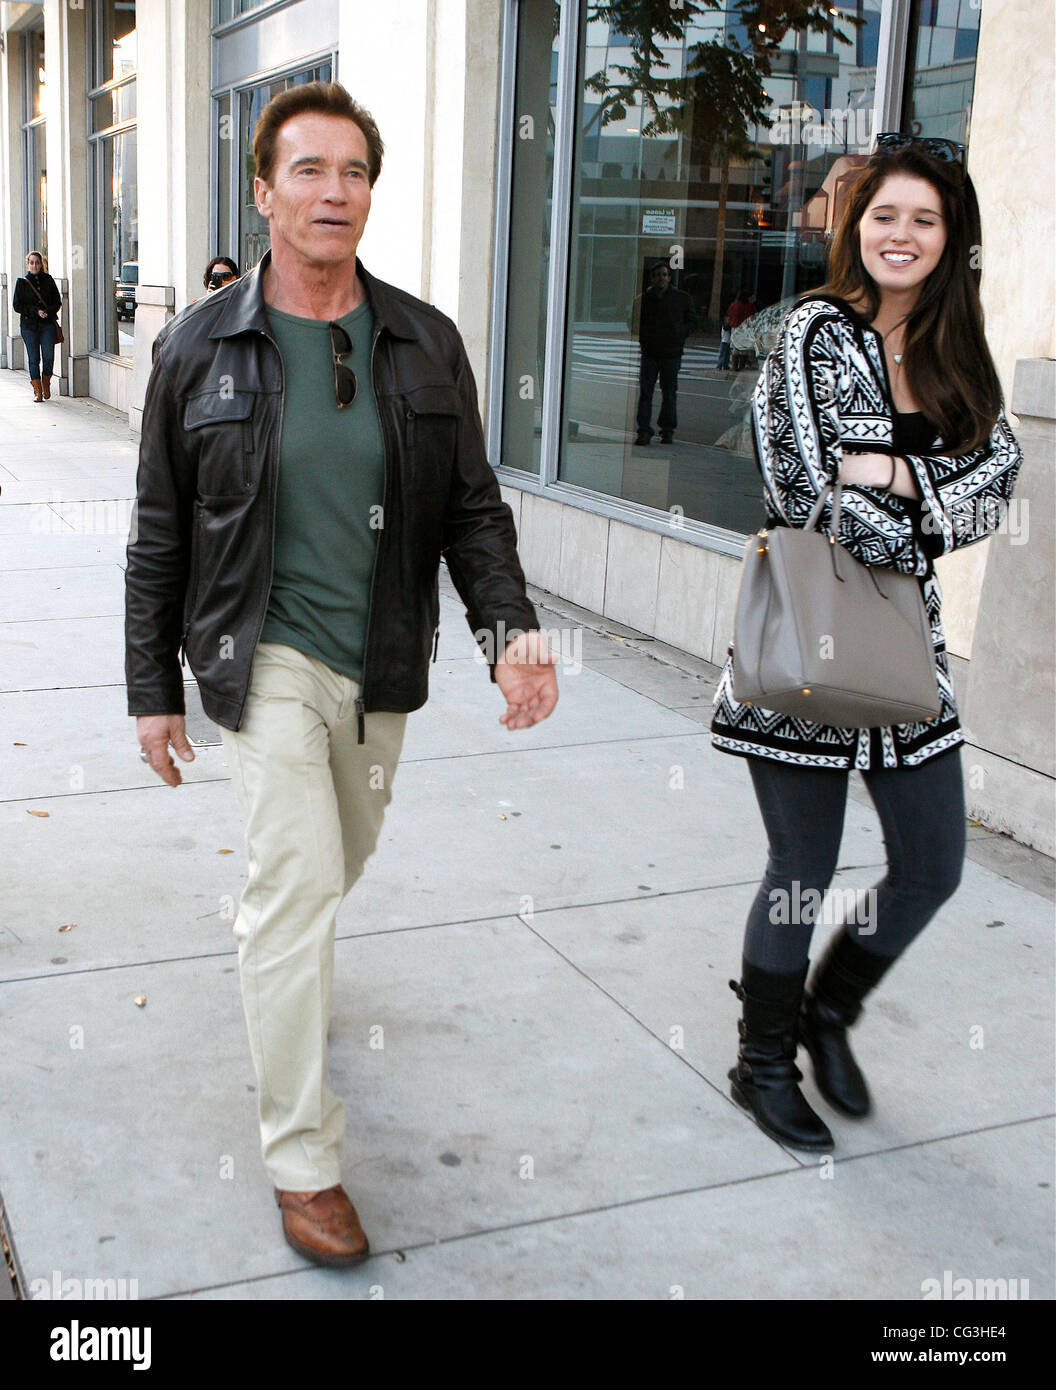 Arnold Schwarzenegger and his daughter Katherine Schwarzenegger shopping at Pottery Barn store in Beverly Hills Los Angeles, California - 09.01.11 Stock Photo